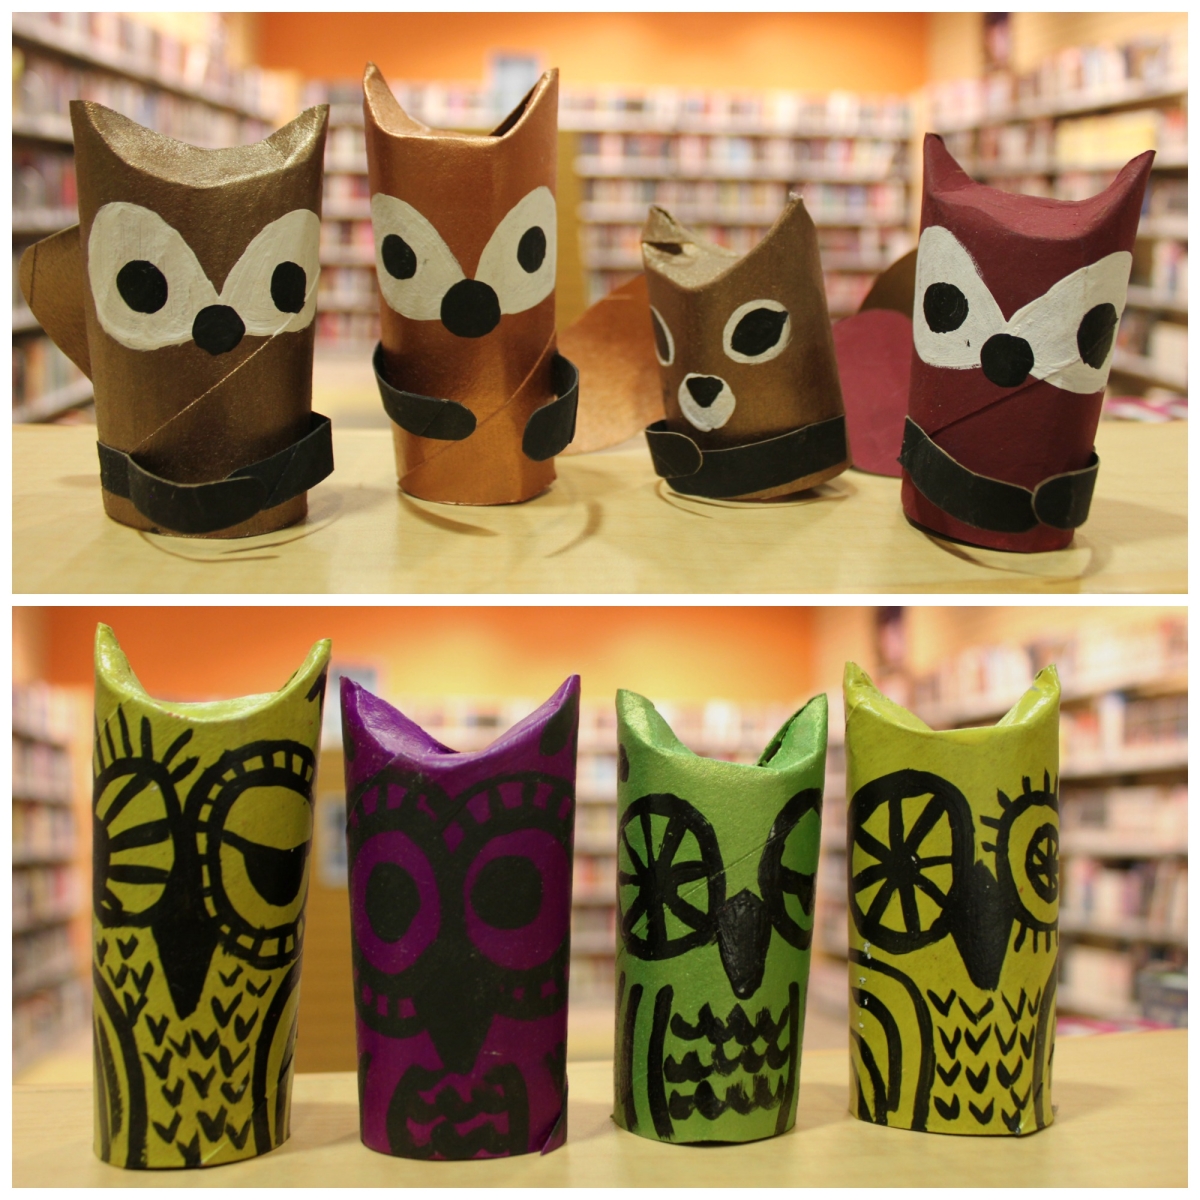 top photo: Foxes and a squirrel made from paper towel tubes; bottom photo: several owls made out of paper towel tubes